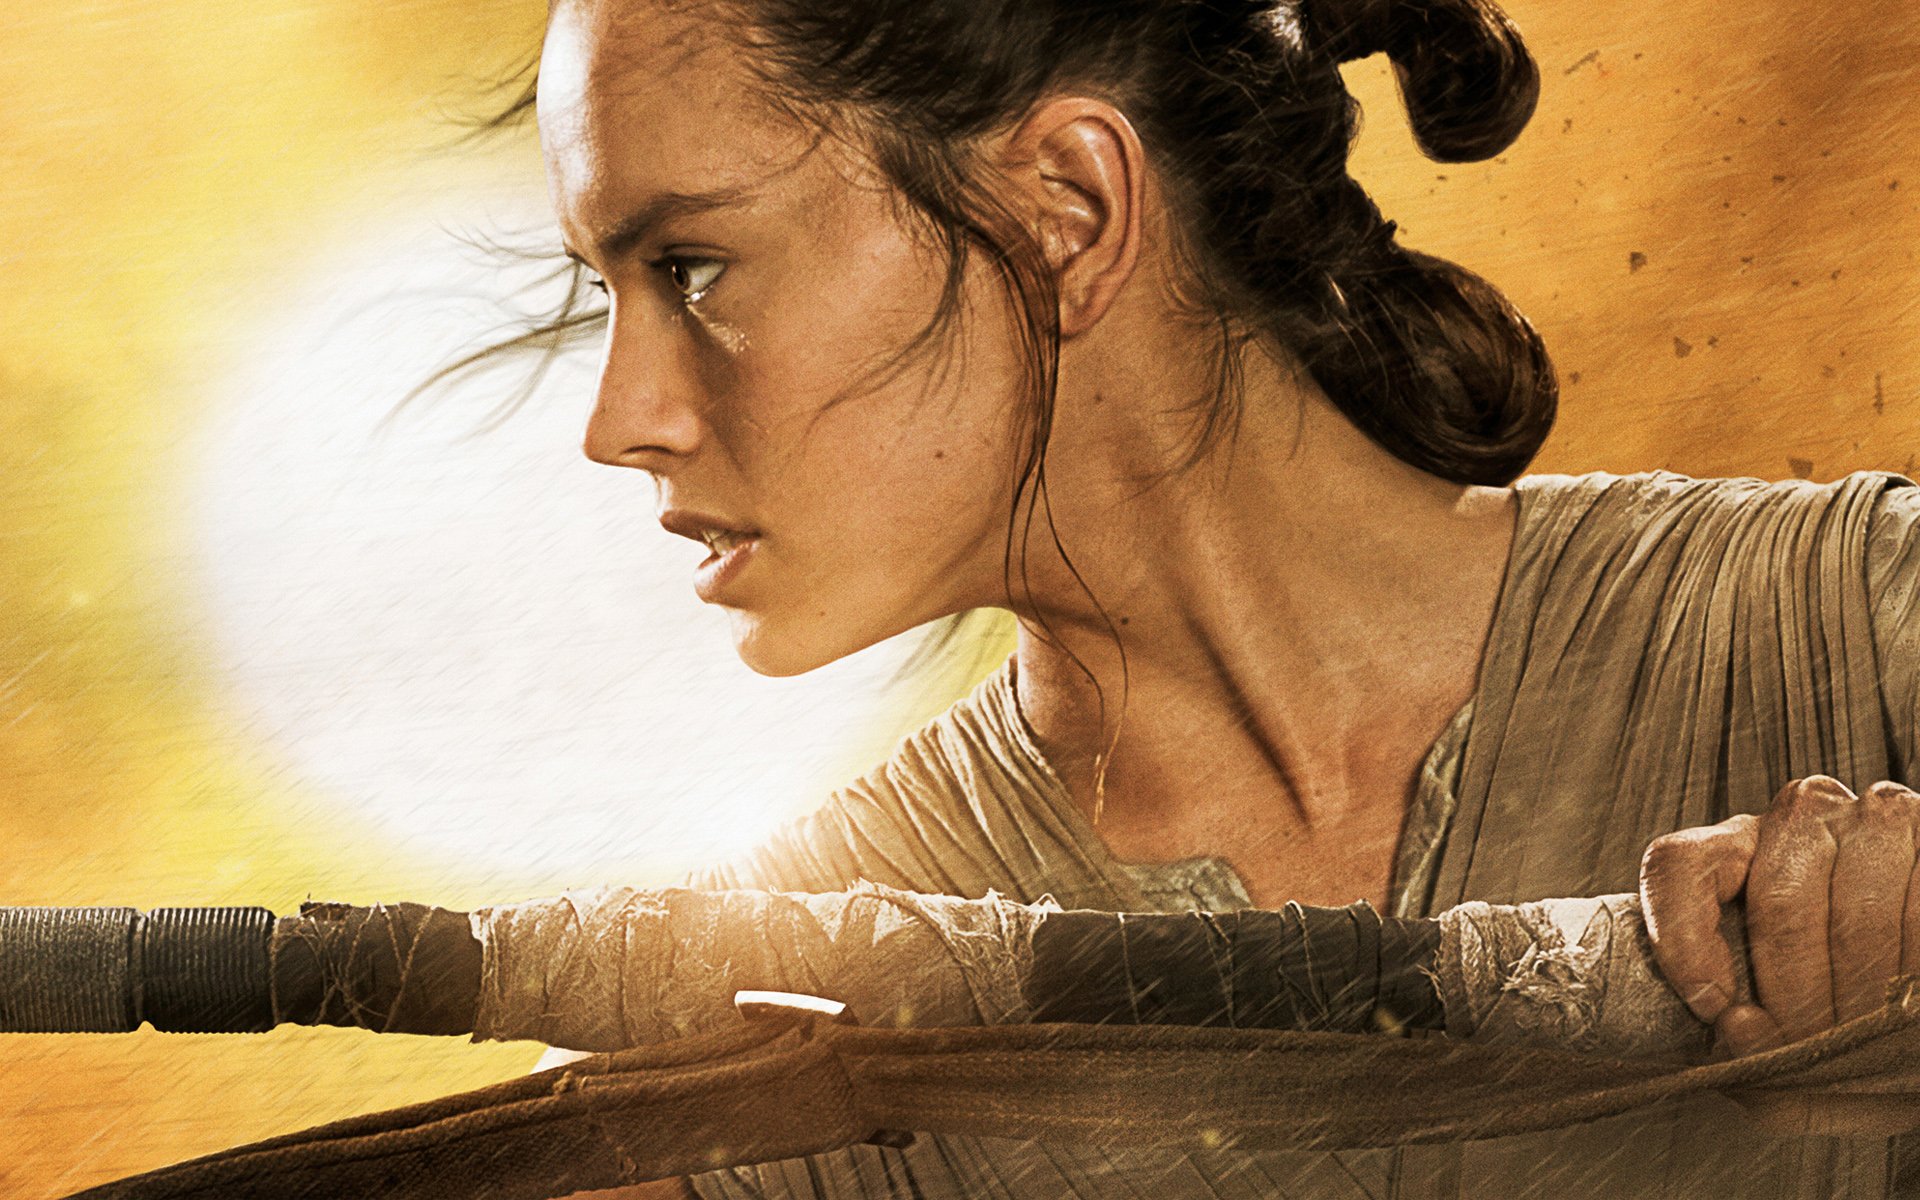 Star Wars The Force Awakens breaks records with 57M Thursday preview